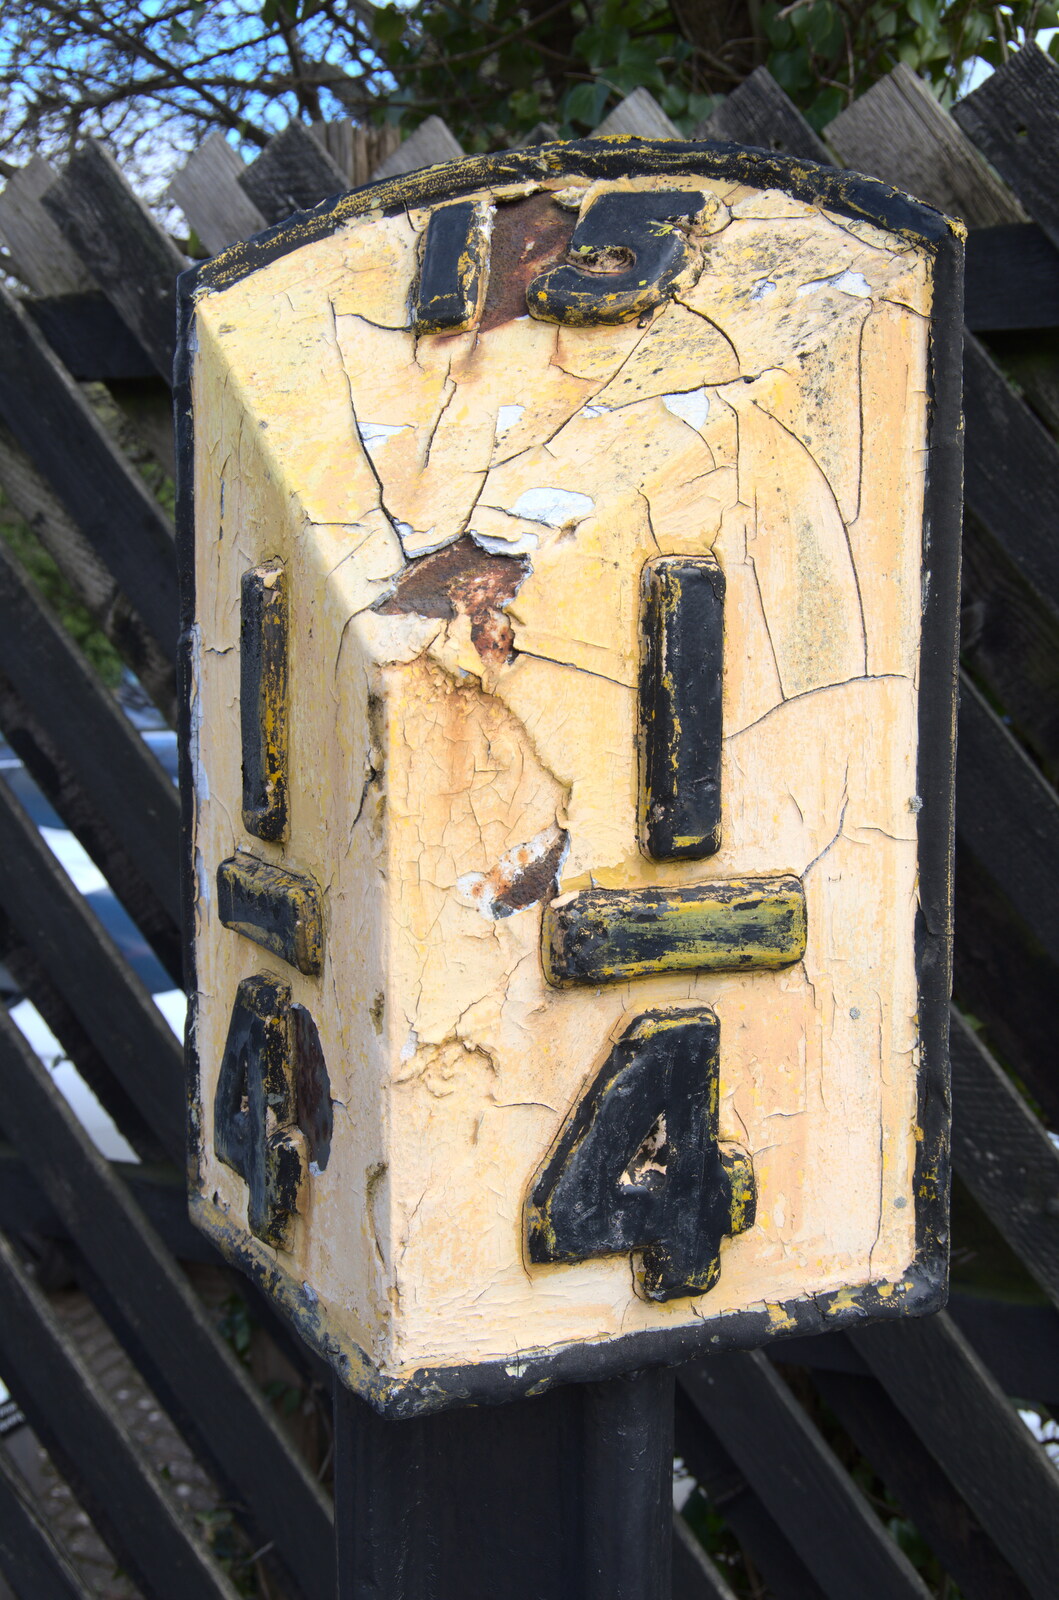 An obsolete railway mile post showing 15¼ miles from HMS Belfast and the South Bank, Southwark, London - 17th February 2020